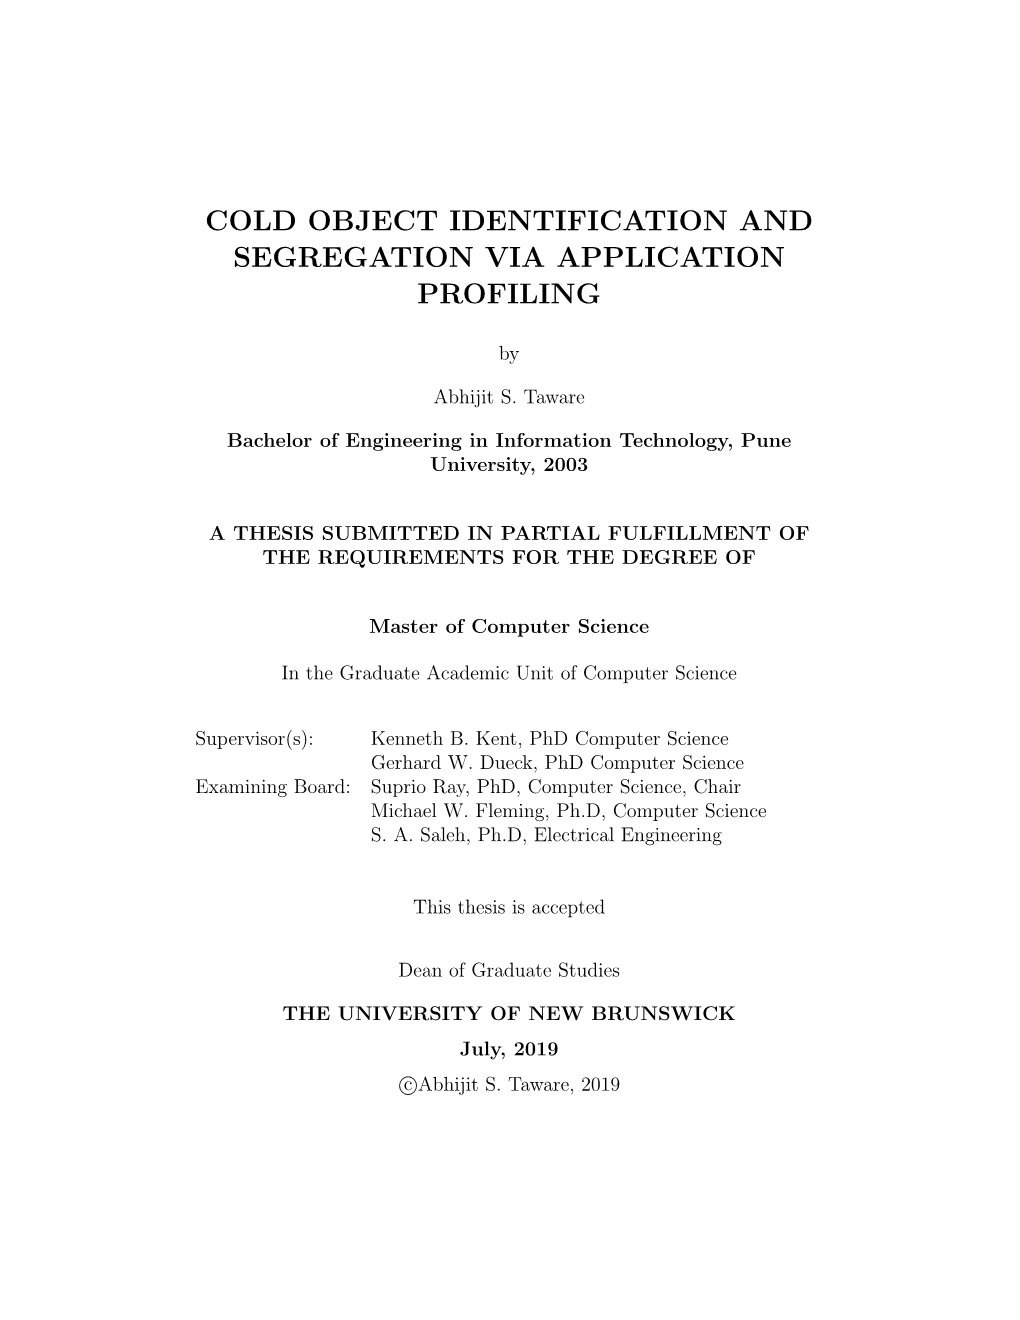 Cold Object Identification and Segregation Via Application Profiling